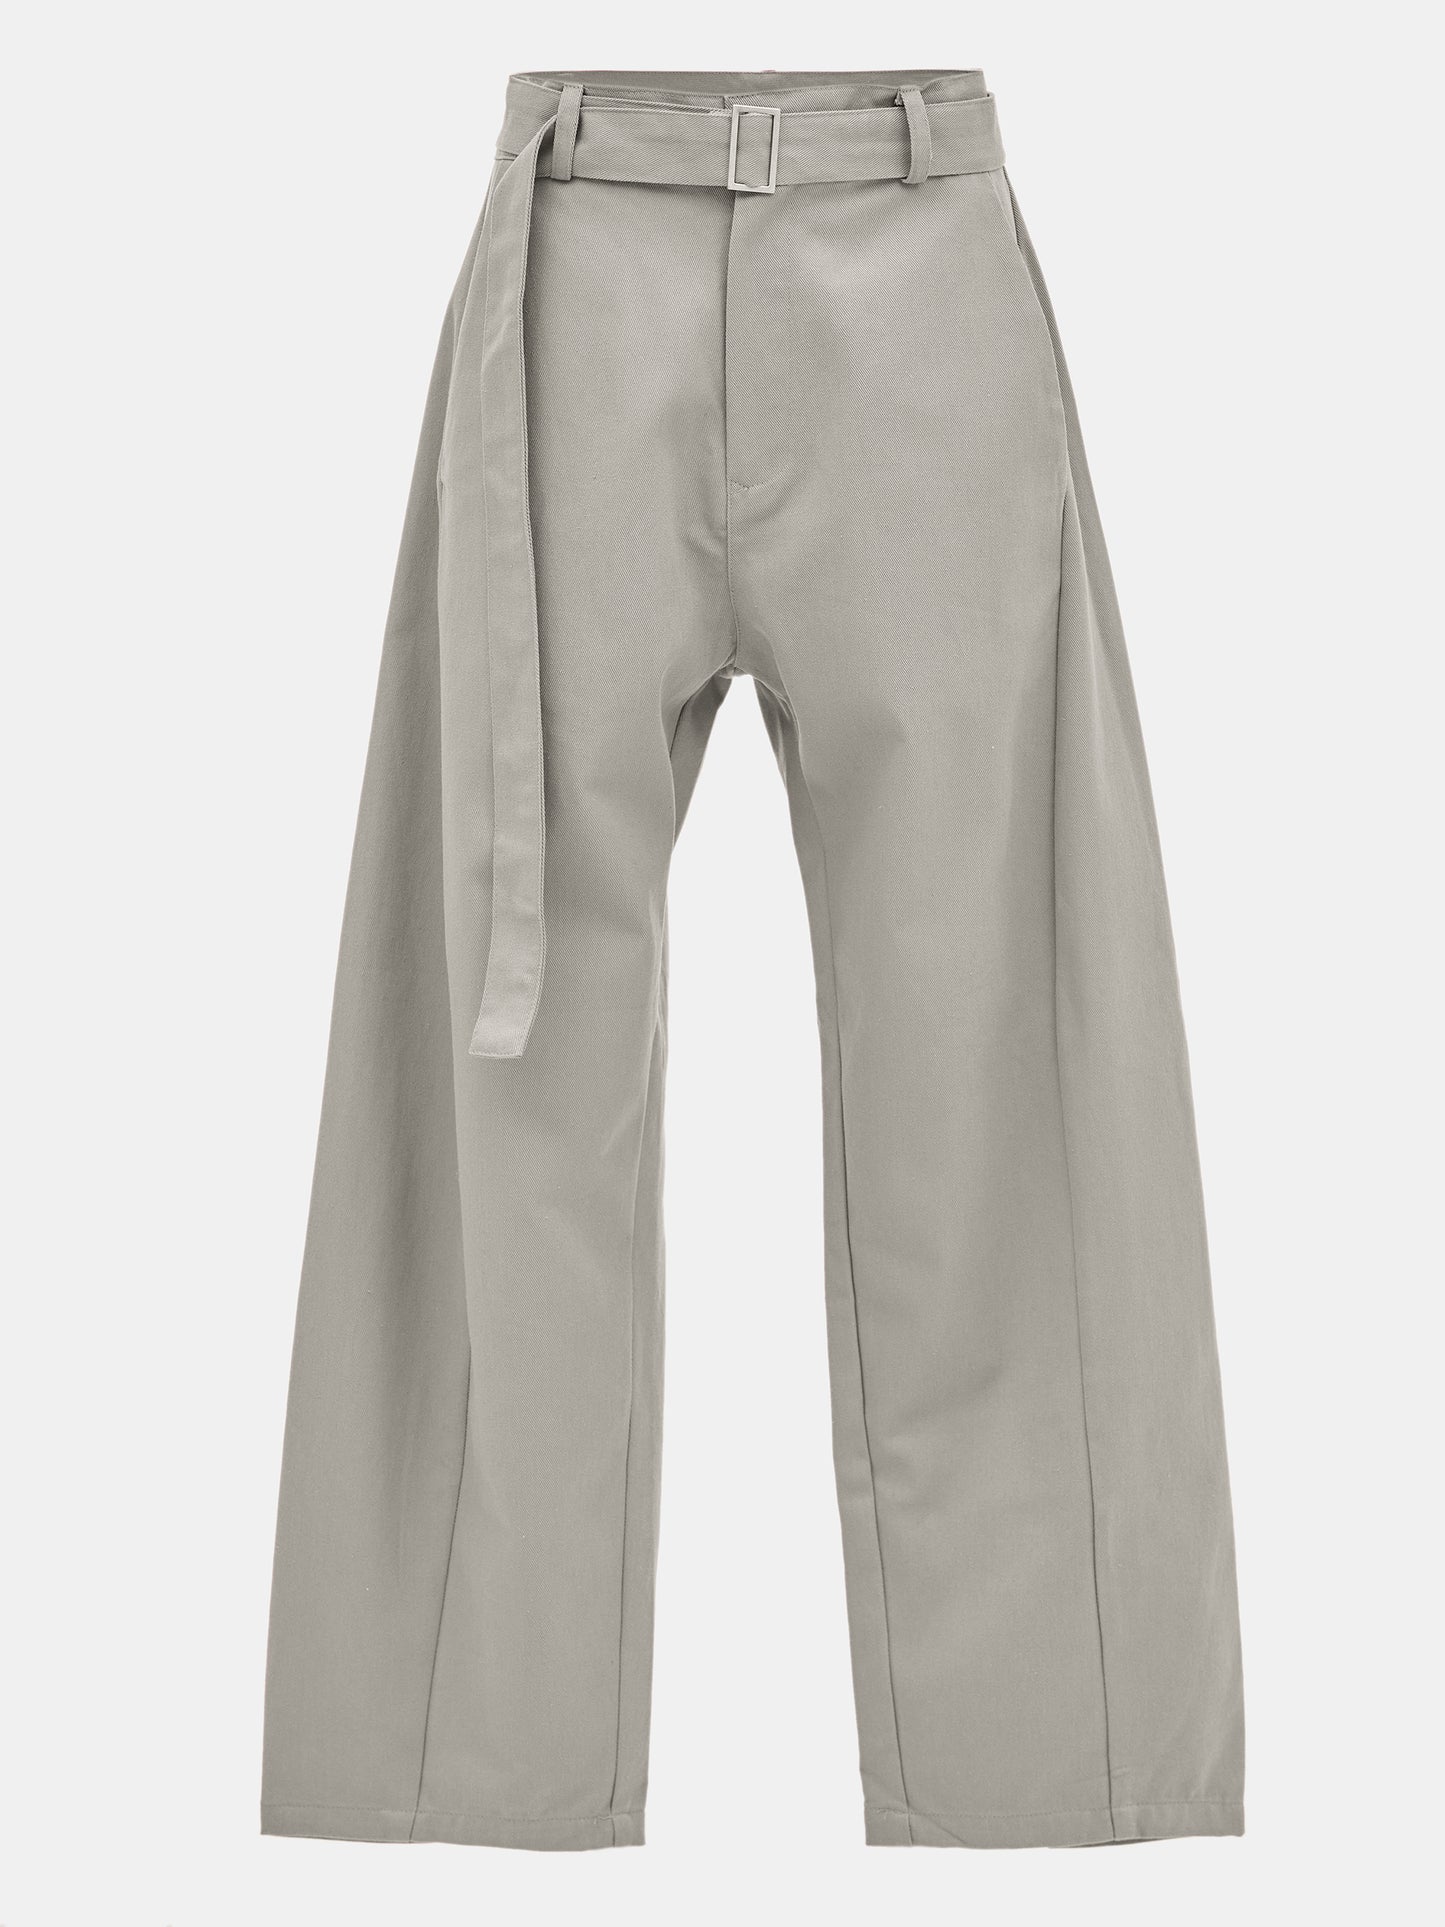 Belted Canvas Pants, Light Grey